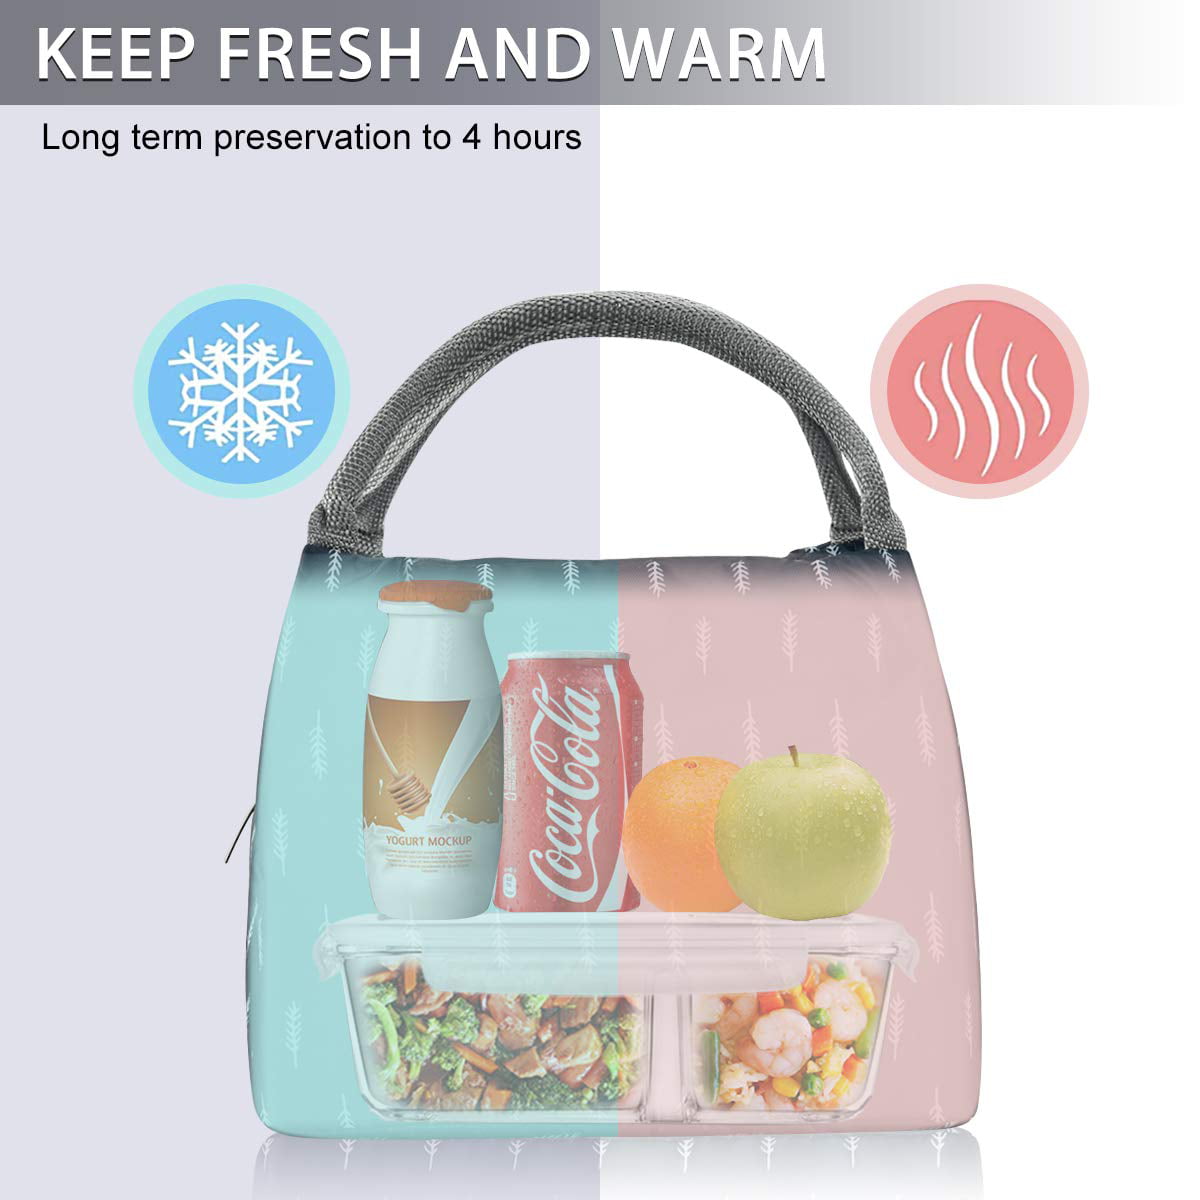 Insulated Lunch Box for Women, Lunch Bags for India